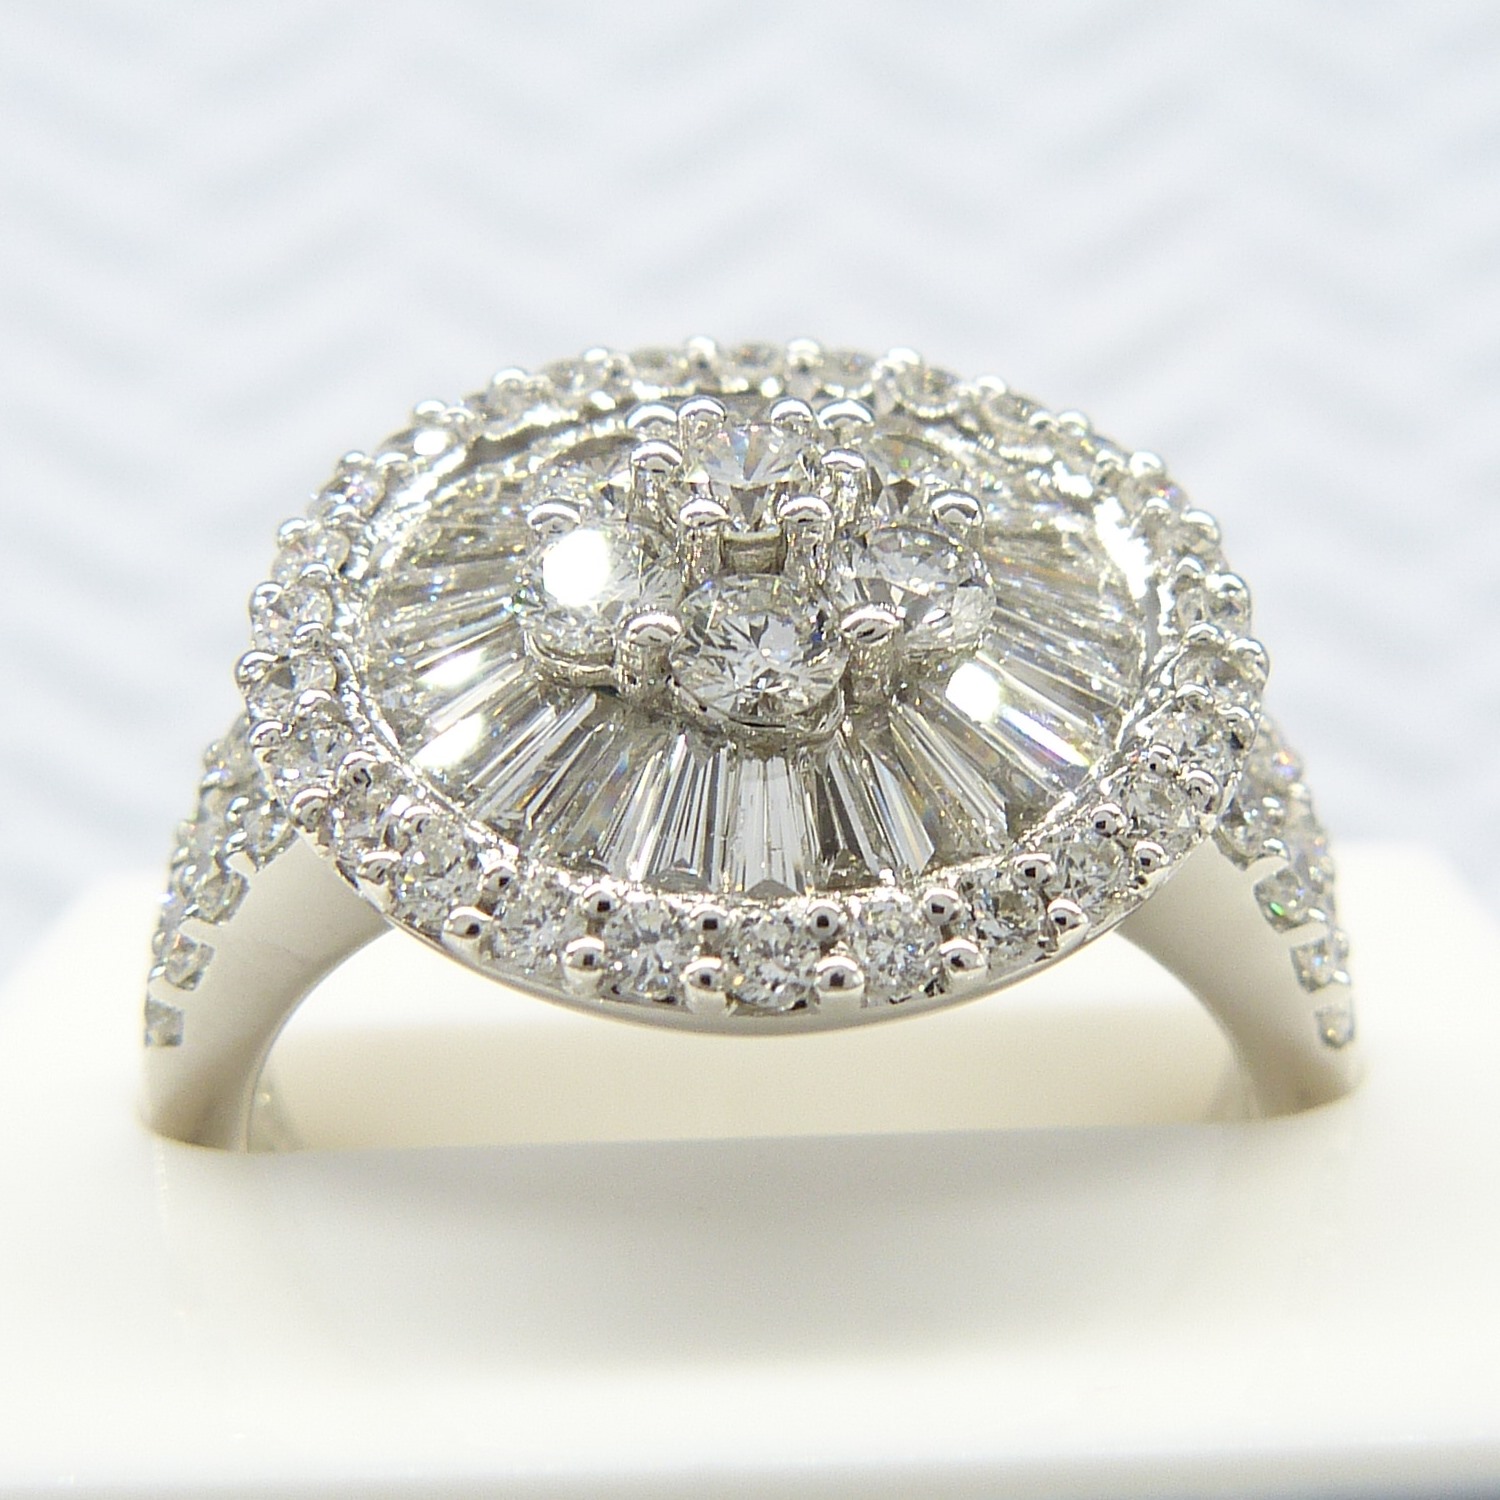 An attractive, certificated, 2.05 carat Diamond cluster ring in 18k white Gold, with Diamond - Image 10 of 10